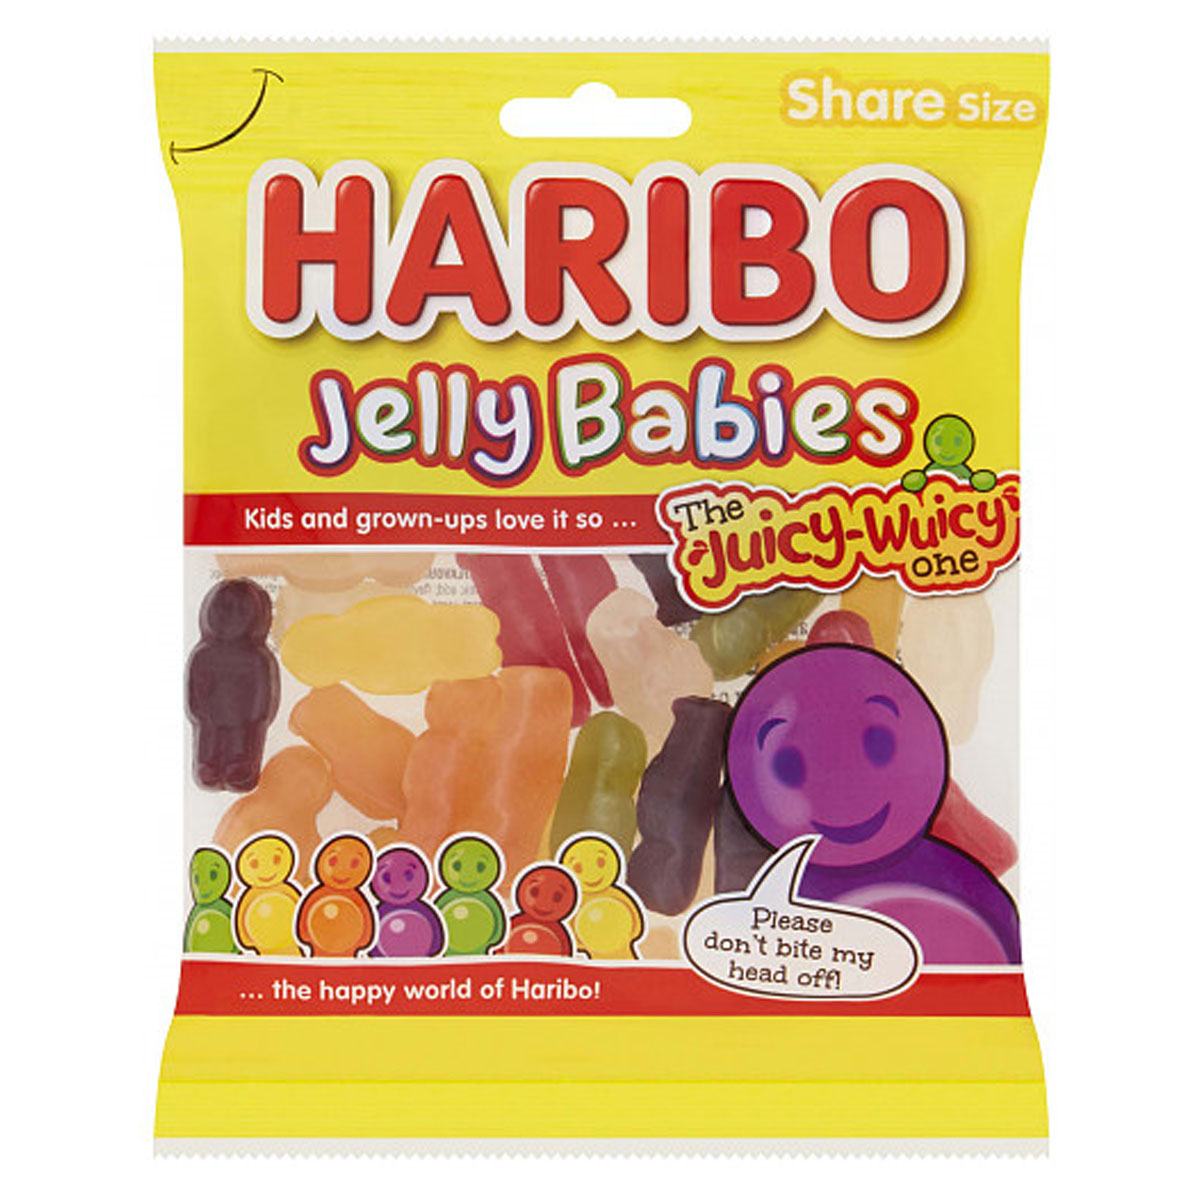 Haribo - Jelly Babies - 160g - Continental Food Store